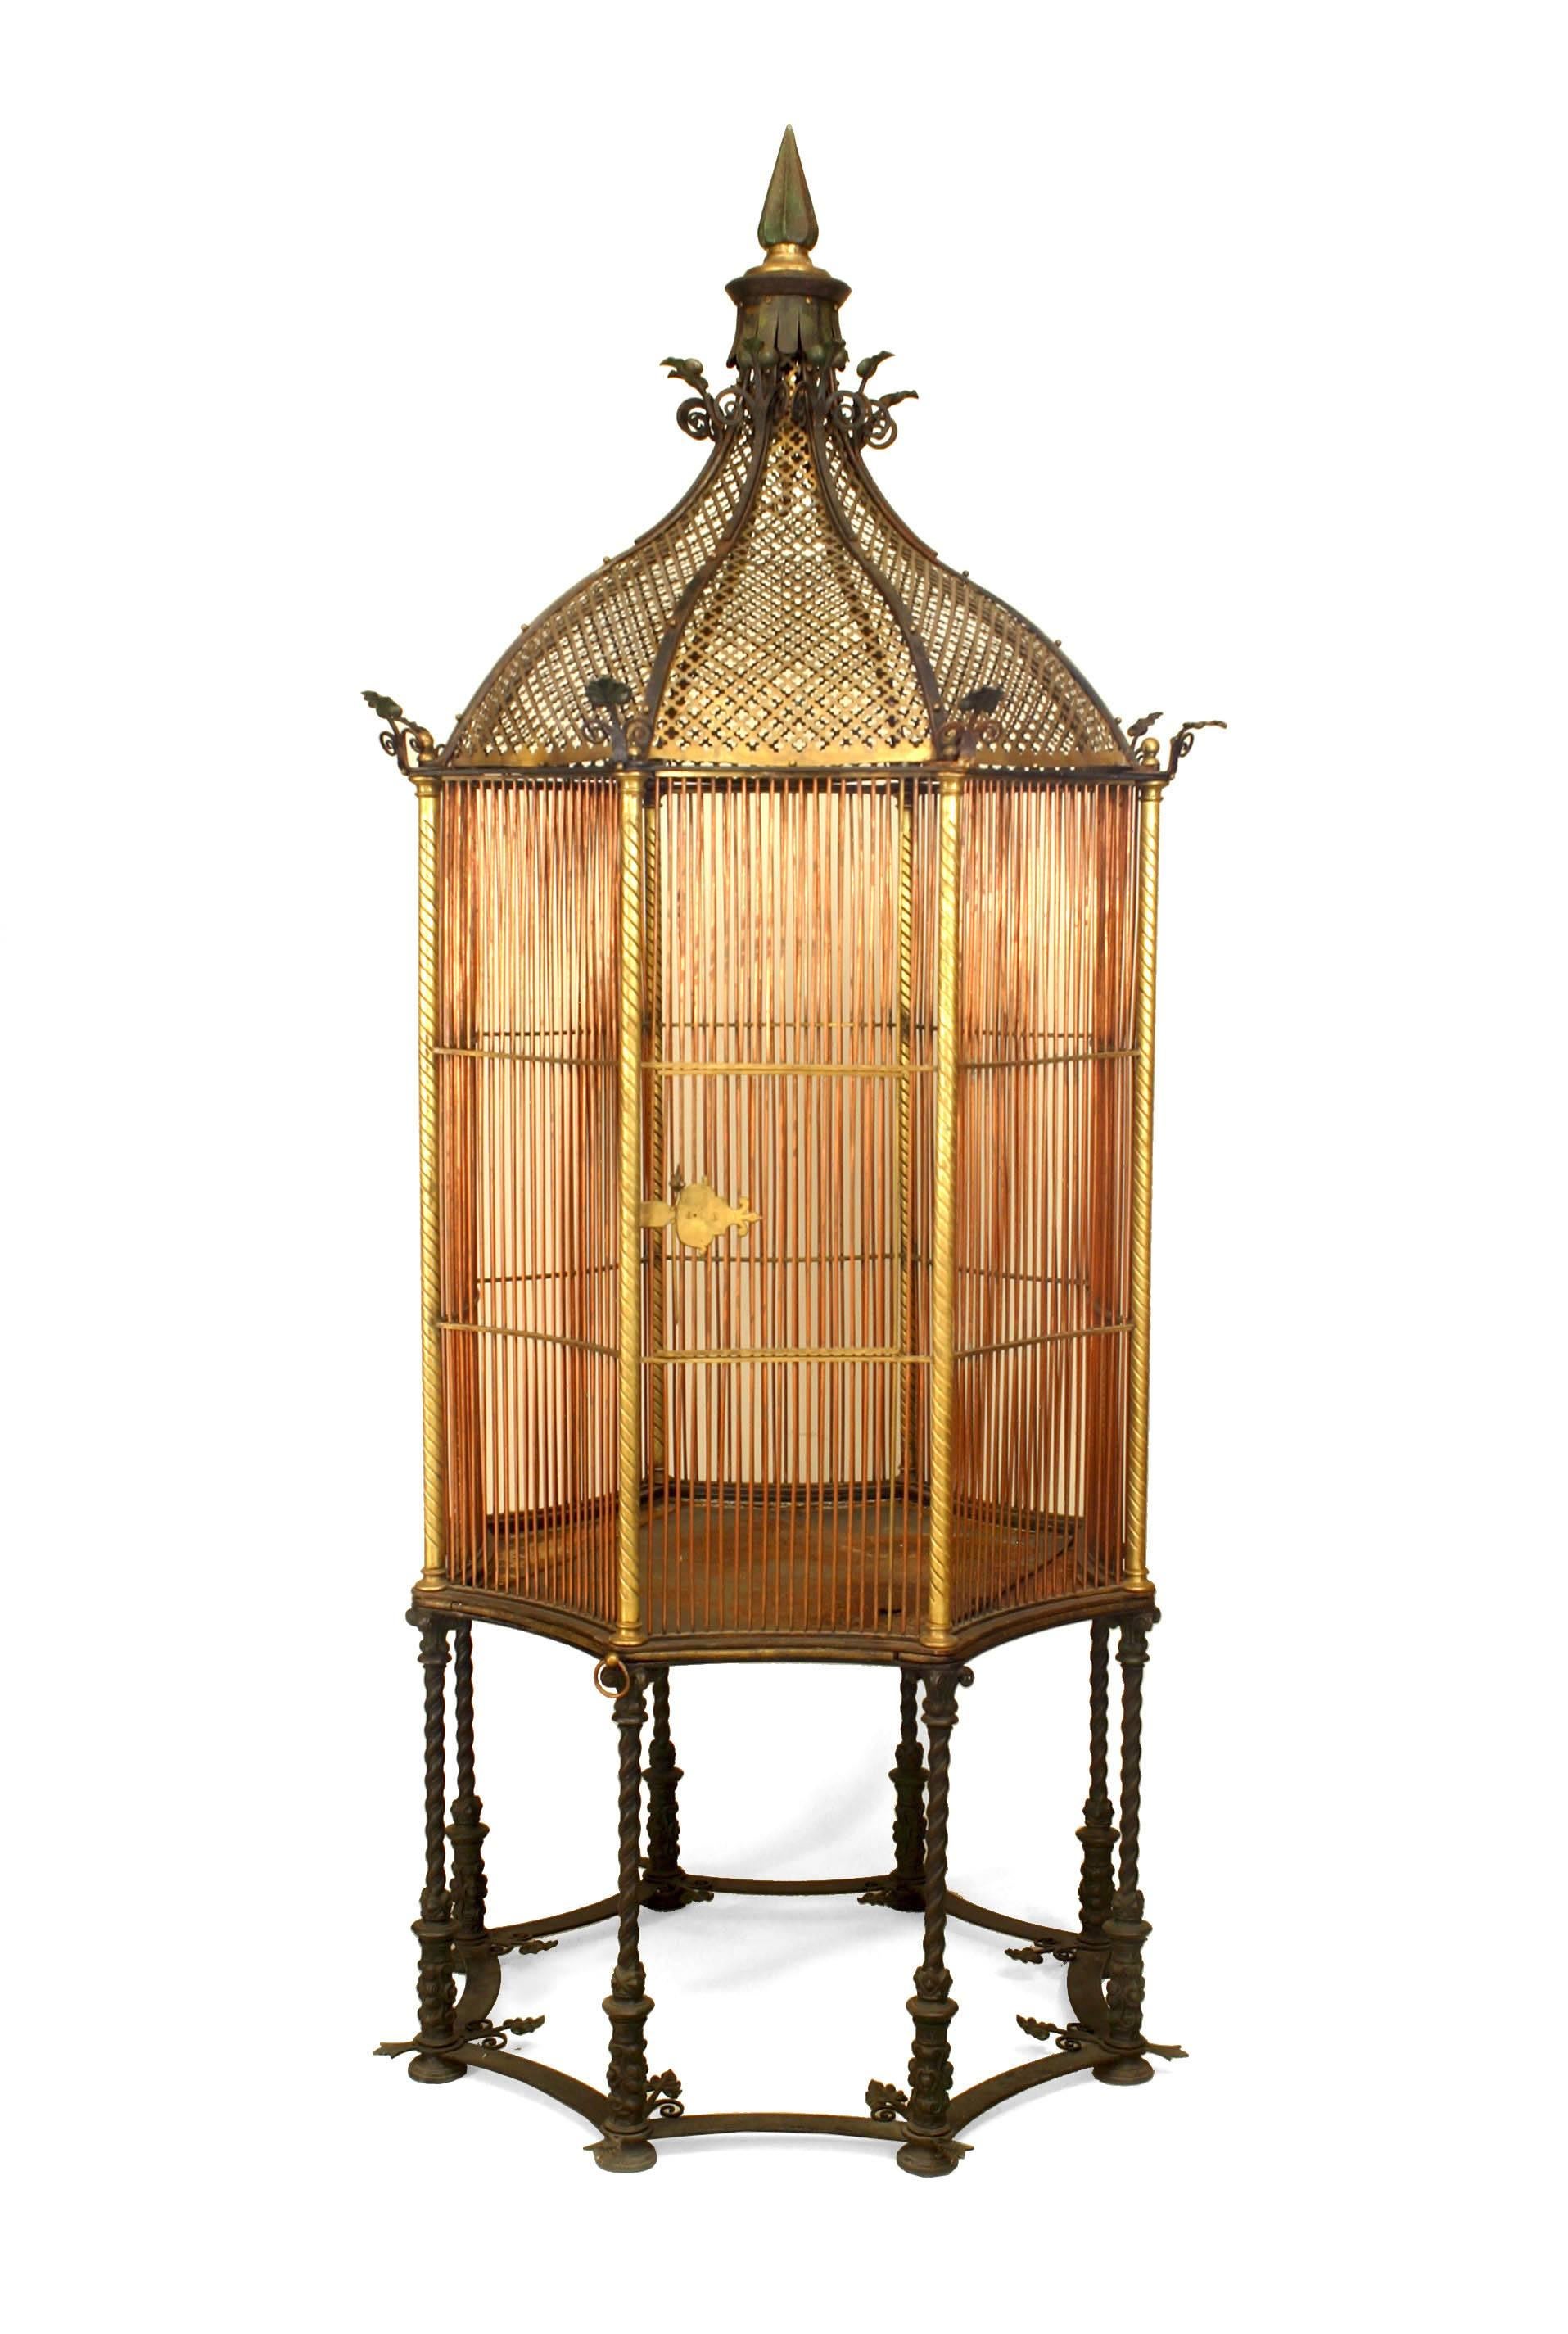 English Victorian bronze and copper octagonal shaped monumental bird cage with a gilt pierced dome & finial top raised on 8 swirl iron legs. (Patent #1107831-Henry Jones)
